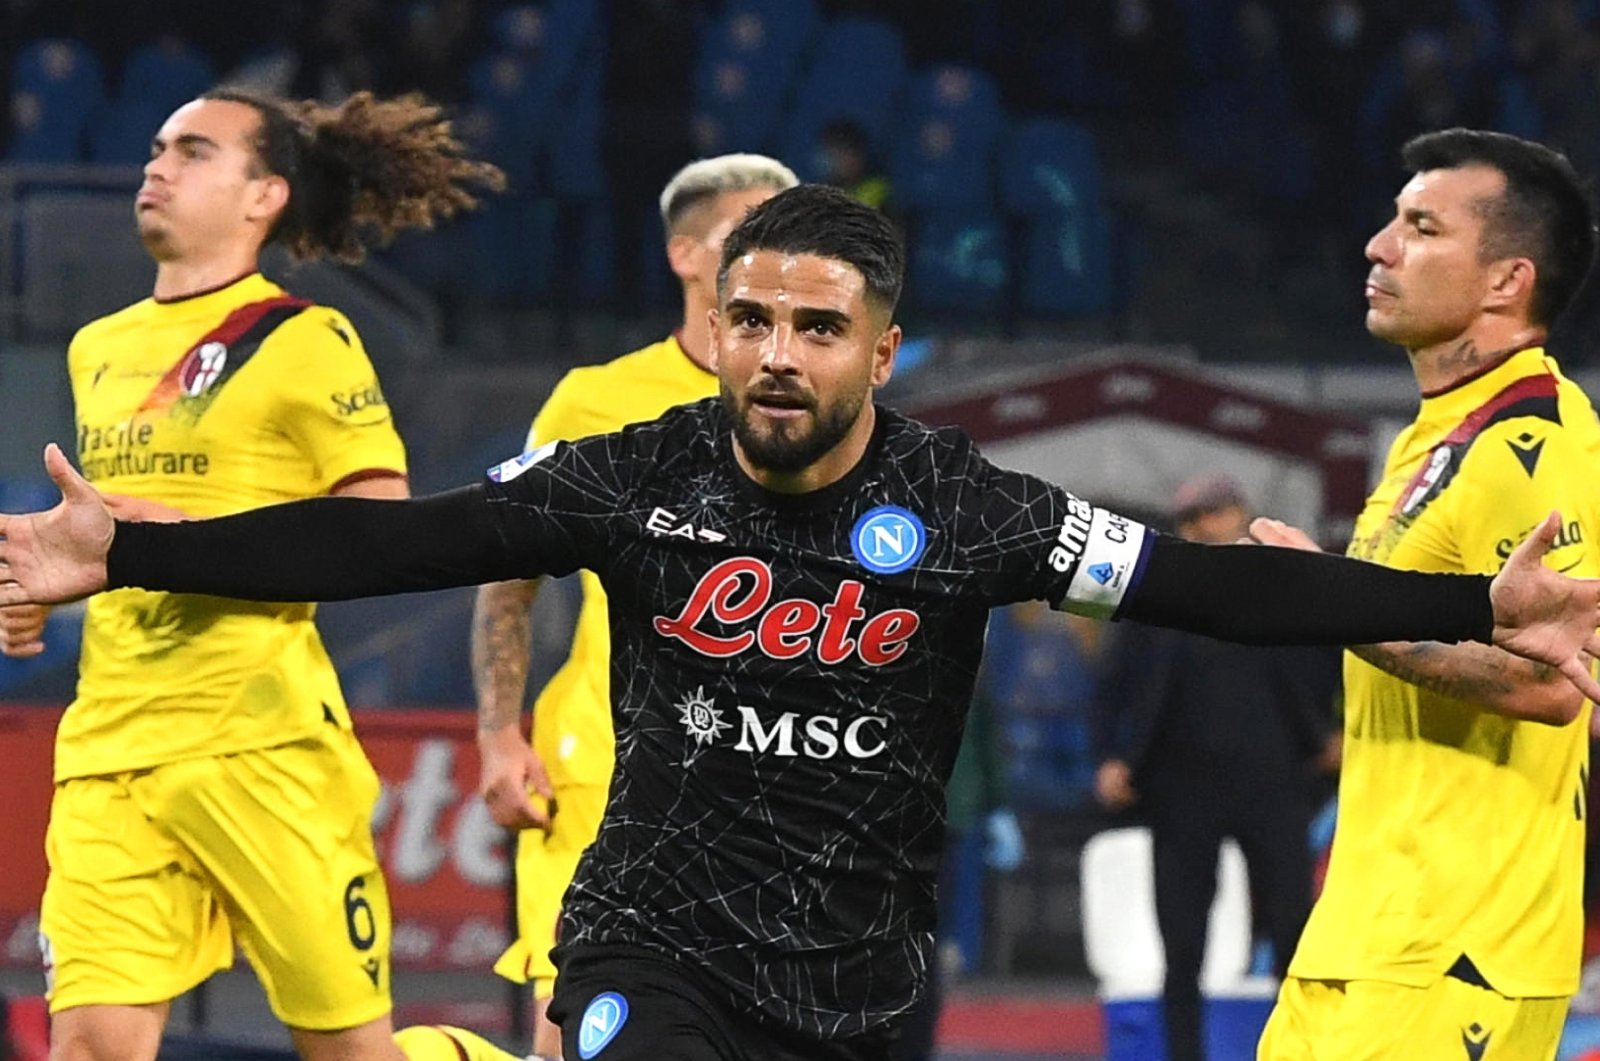 Napoli's Lorenzo Insigne celebrates scoring from the spot in a Serie A match against Bologna in Naples, Italy, Oct. 28, 2021. (EPA Photo)